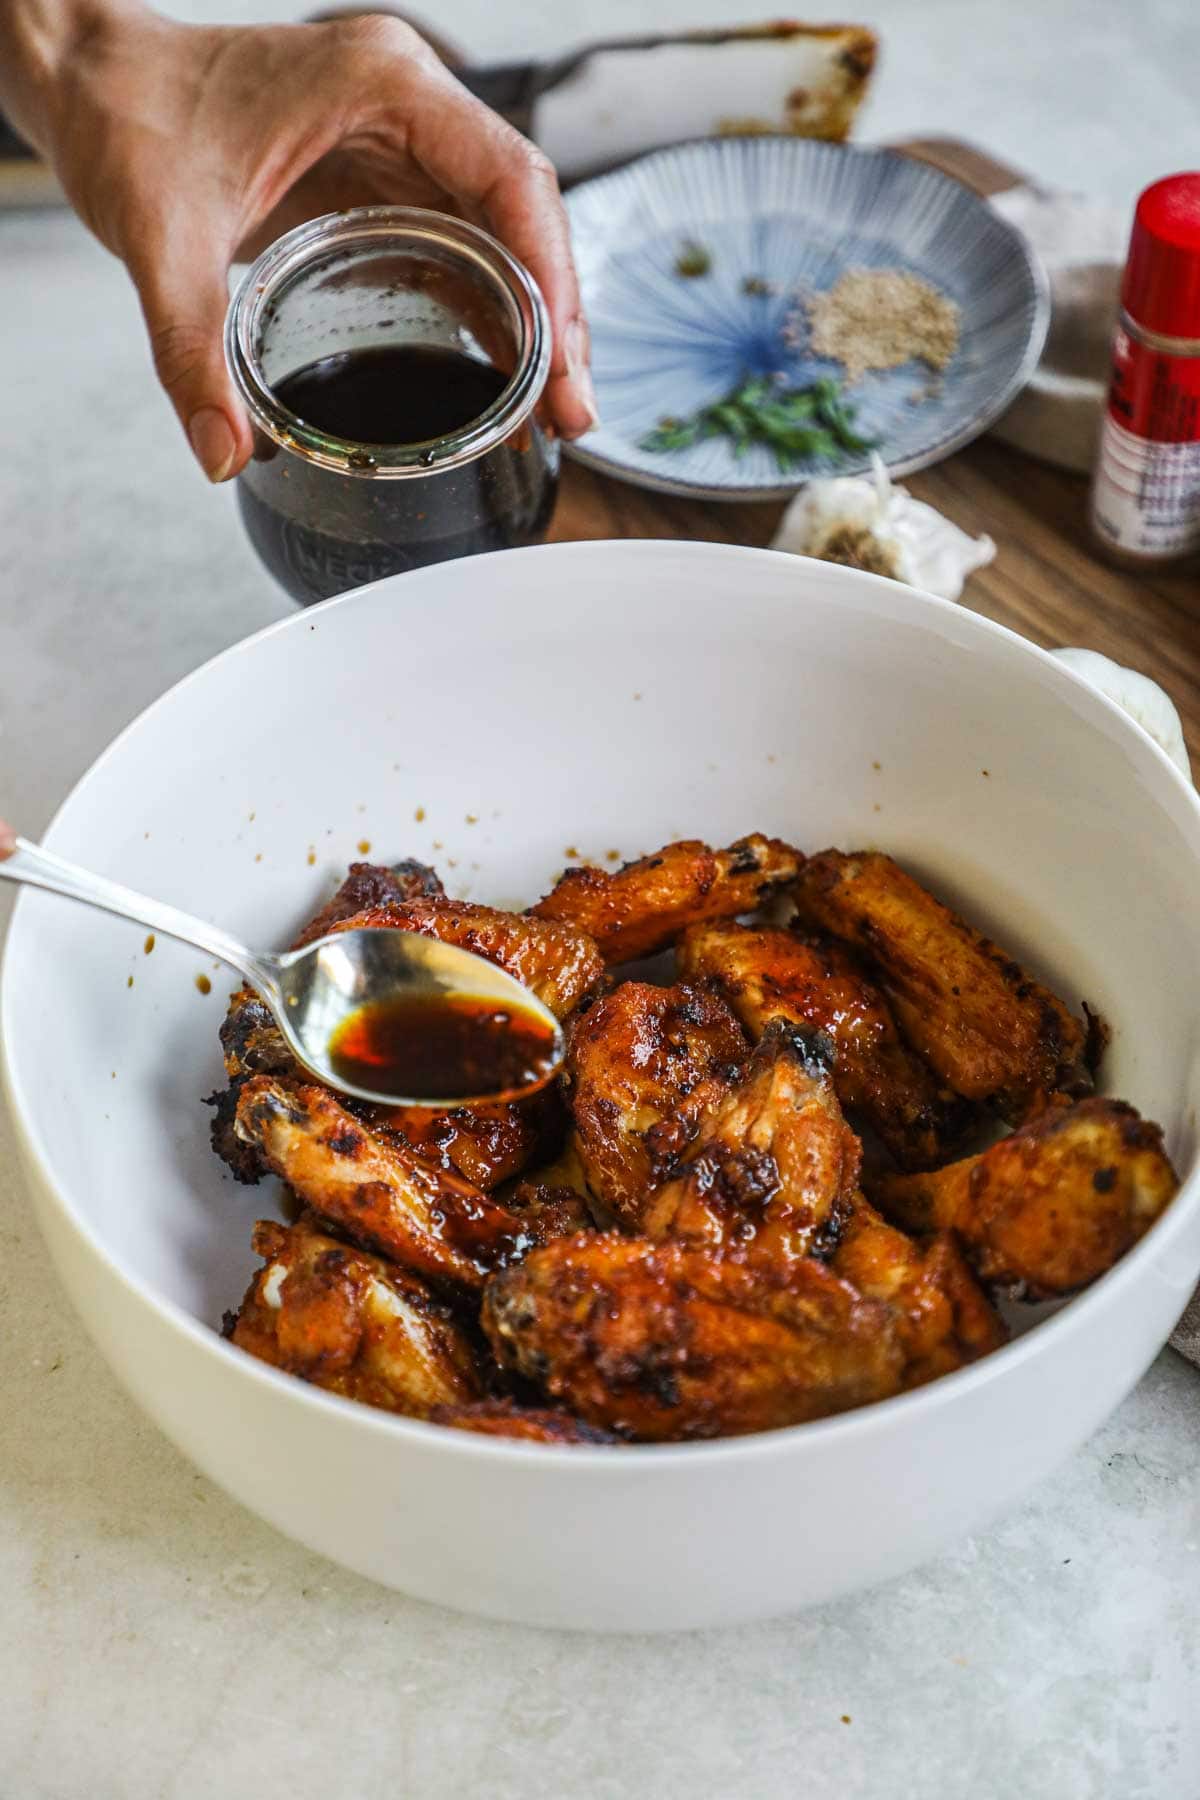 Spoon pouring honey soy garlic sauce on top of cooked wings to make a sticky, umami-packed glaze.